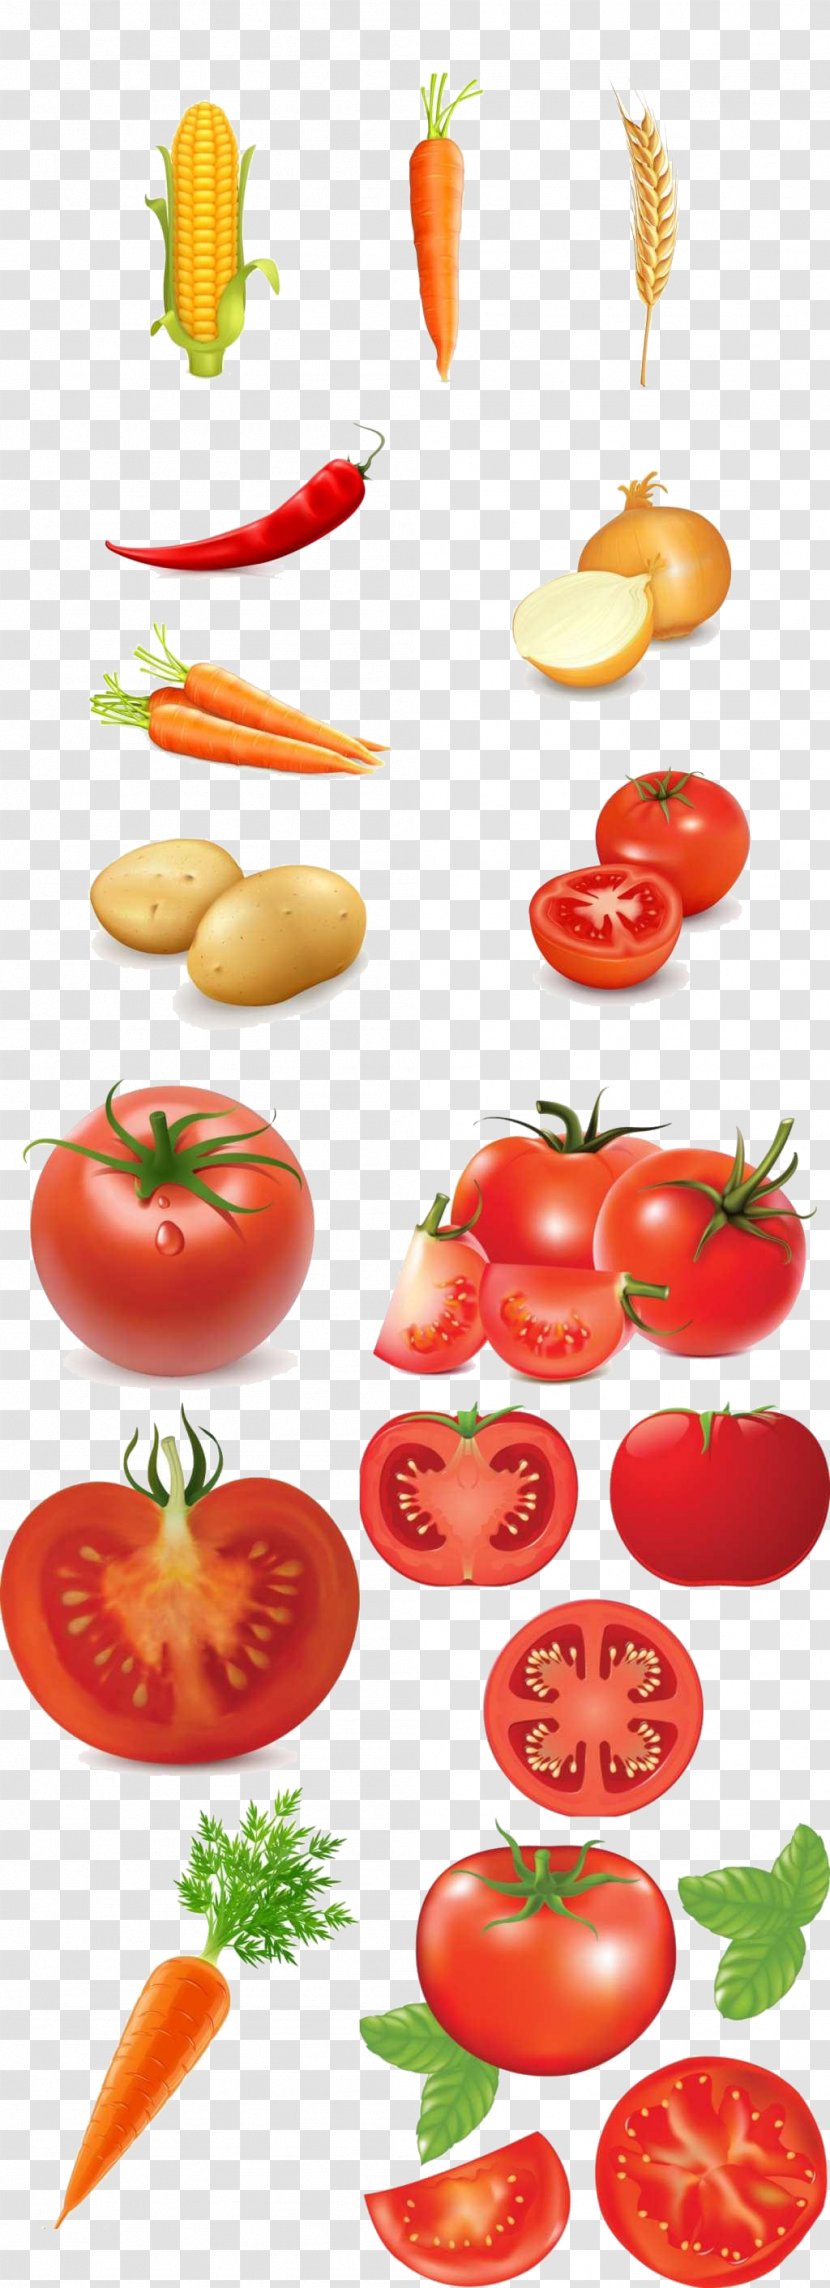 Cherry Tomato Stir-fried And Scrambled Eggs Vegetable Food - Potato Genus - Vegetables Of All Kinds Elements Transparent PNG